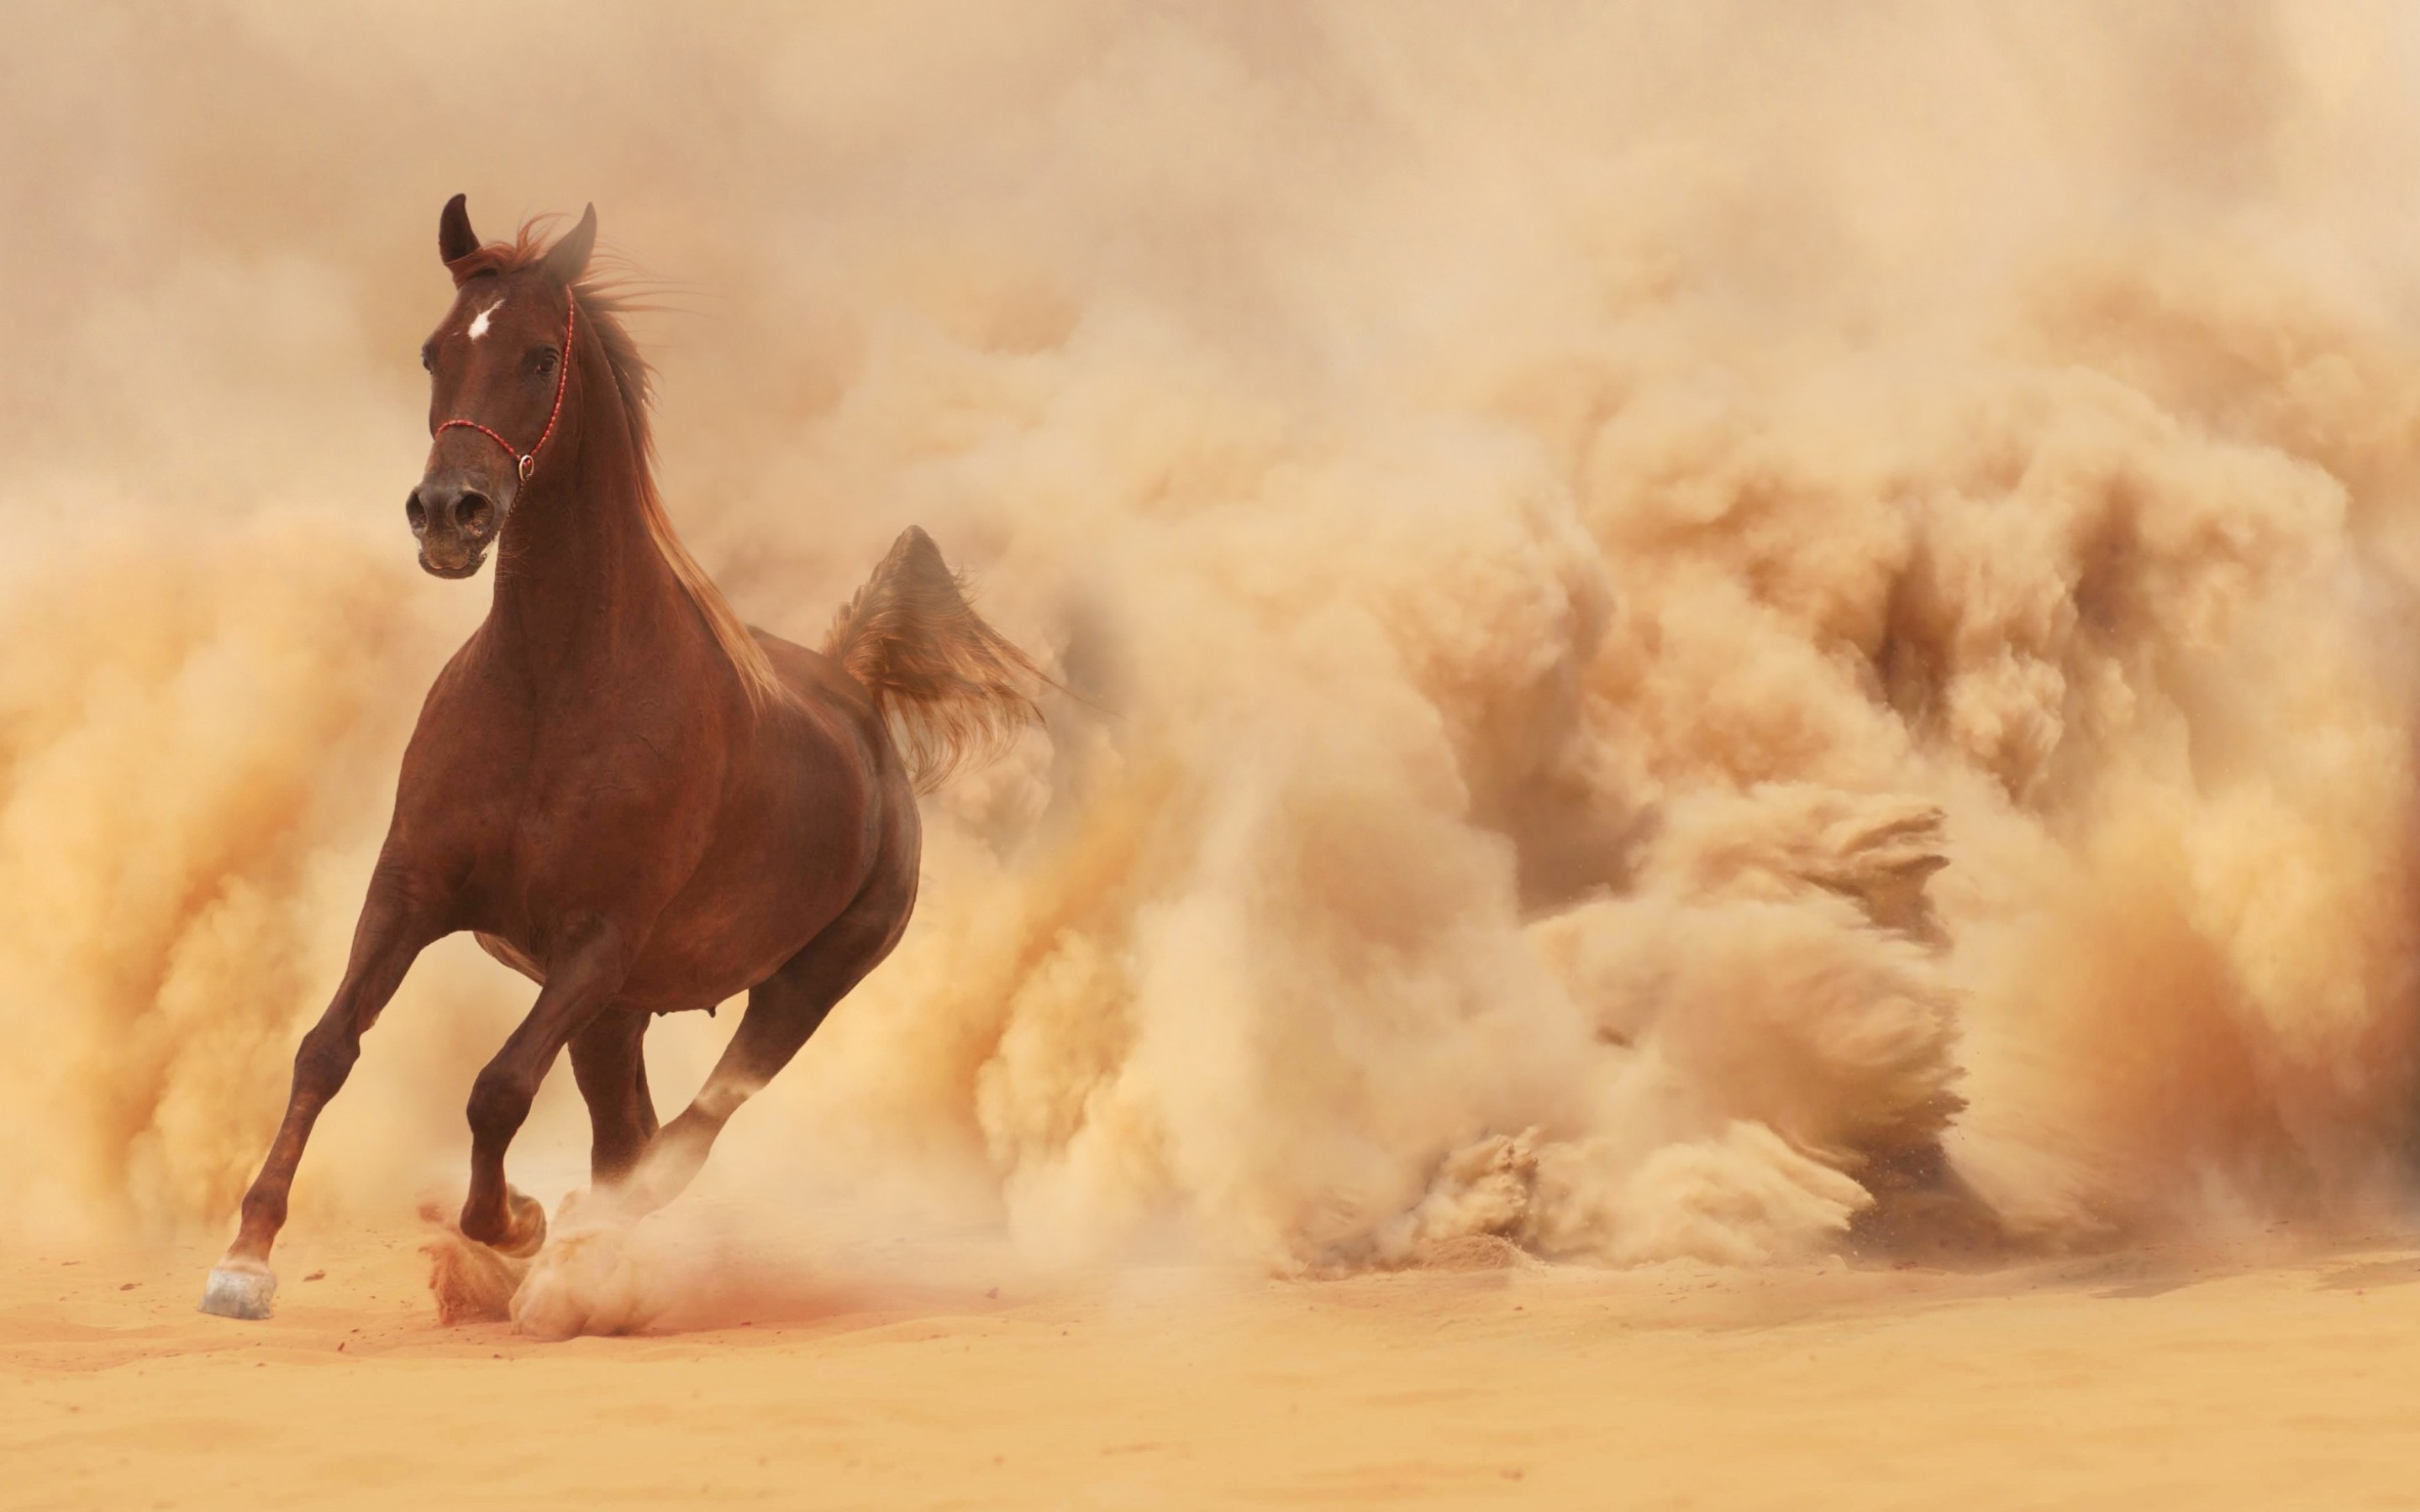 android running, dust, animal, horse, dirt